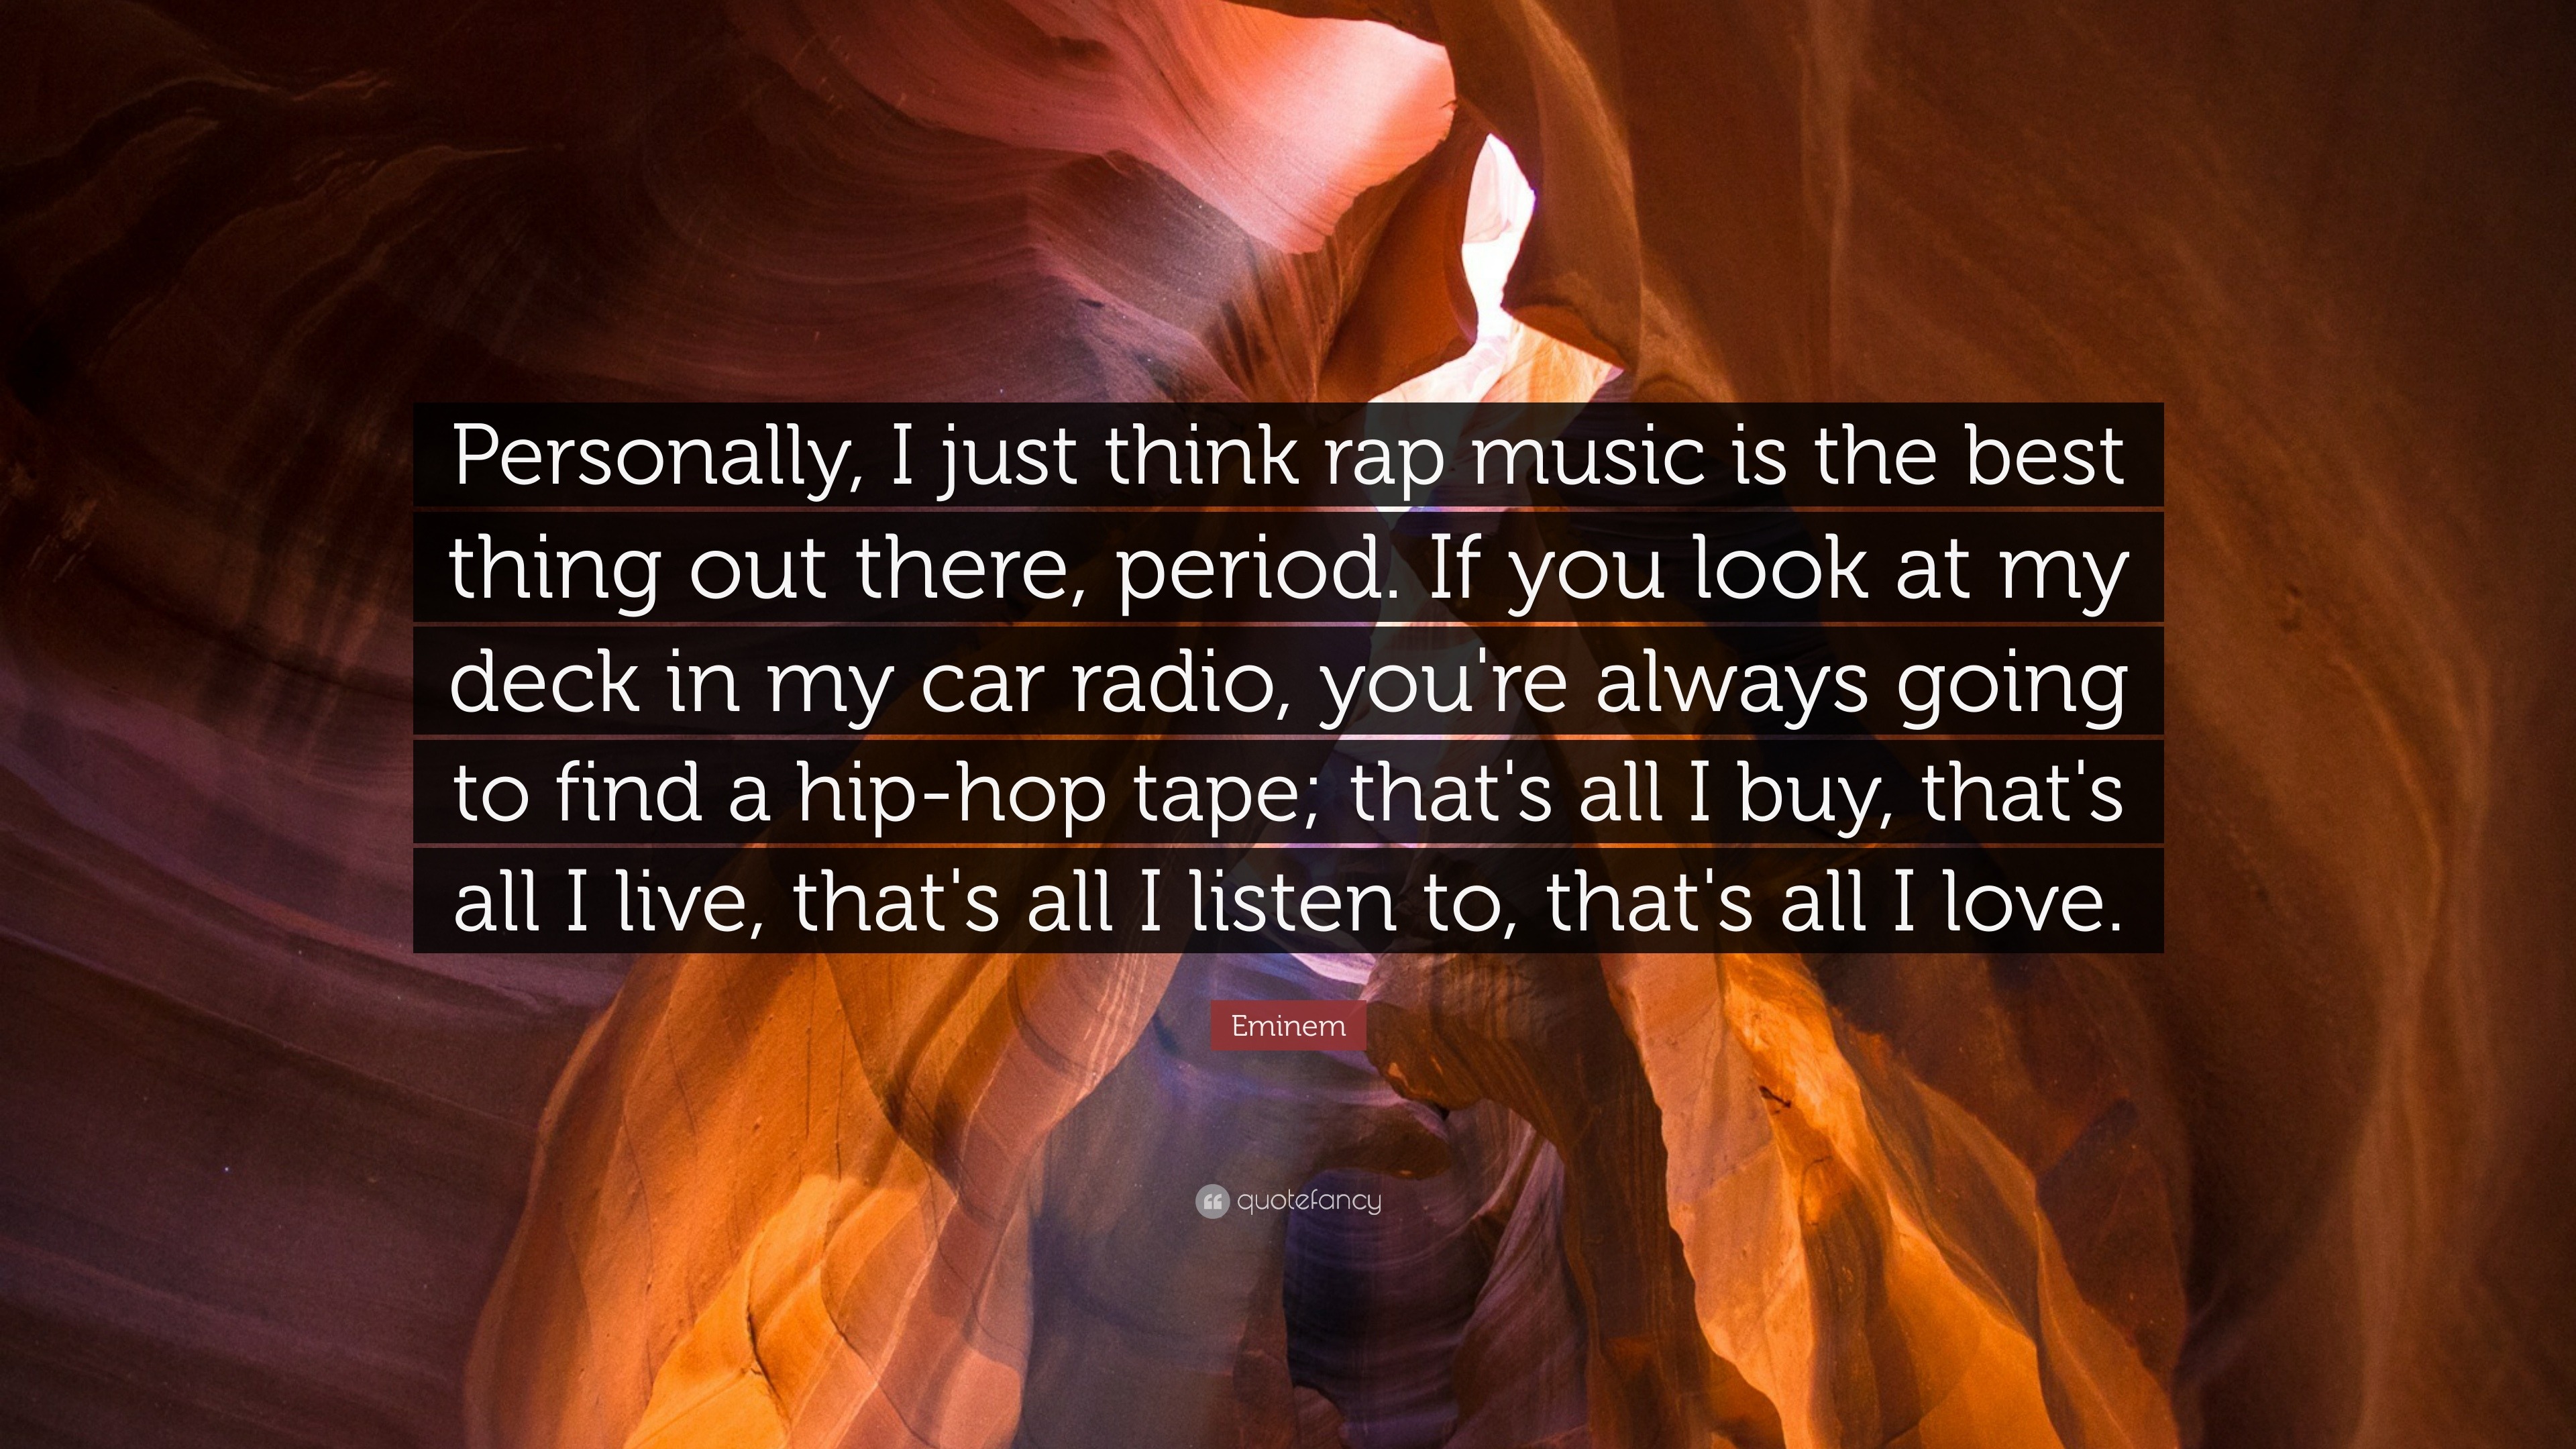 Eminem Quote “Personally I just think rap music is the best thing out